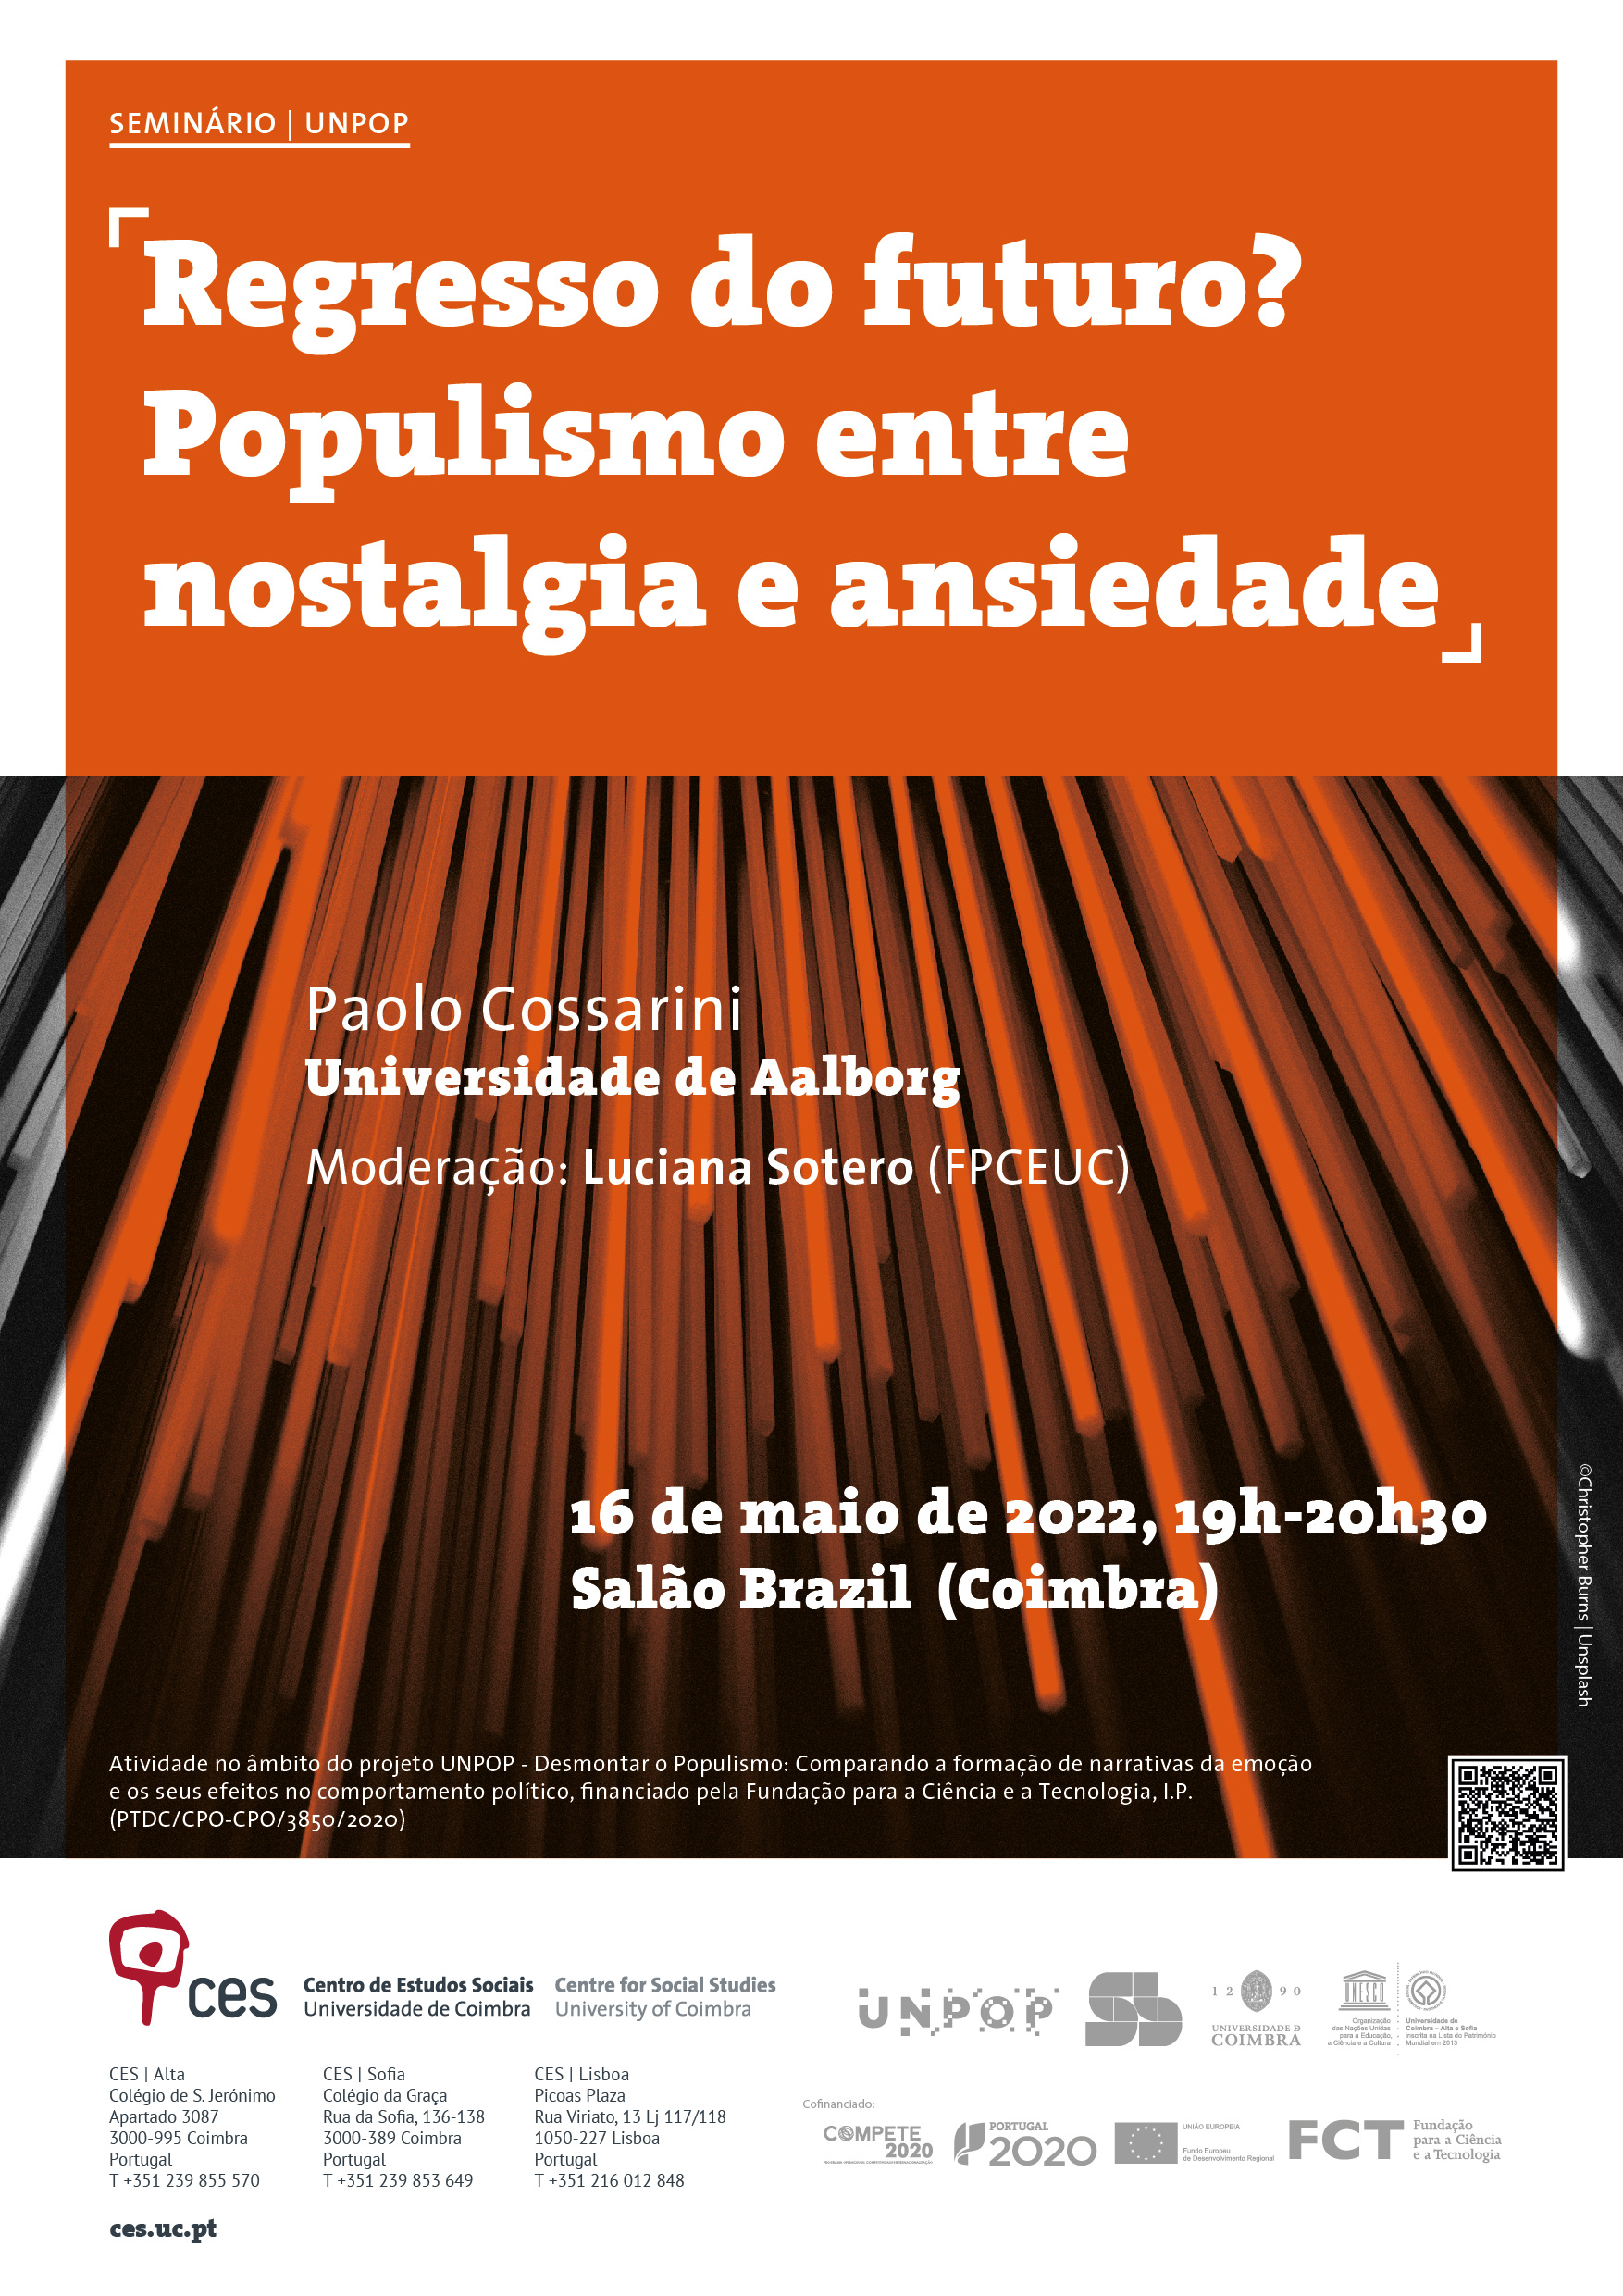 Back to the future? Populism between nostalgia and anxiety <span id="edit_38014"><script>$(function() { $('#edit_38014').load( "/myces/user/editobj.php?tipo=evento&id=38014" ); });</script></span>